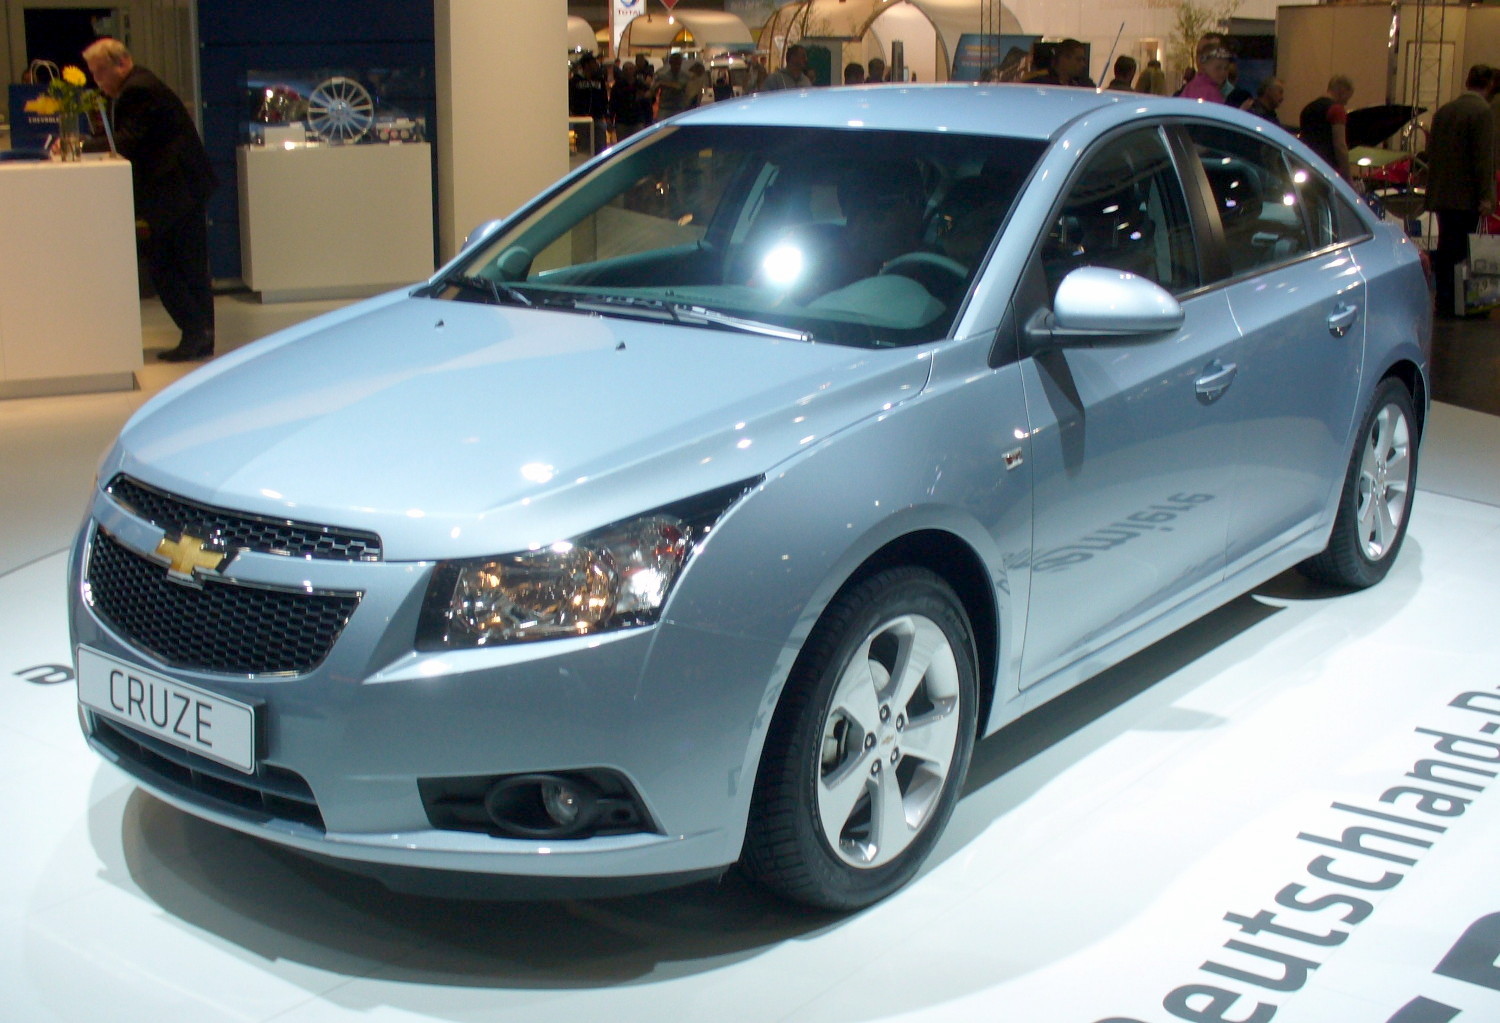 Chevrolet Cruze 2013 HD Wallpaper-Free HD Resolutions - 9to5 Car Wallpapers